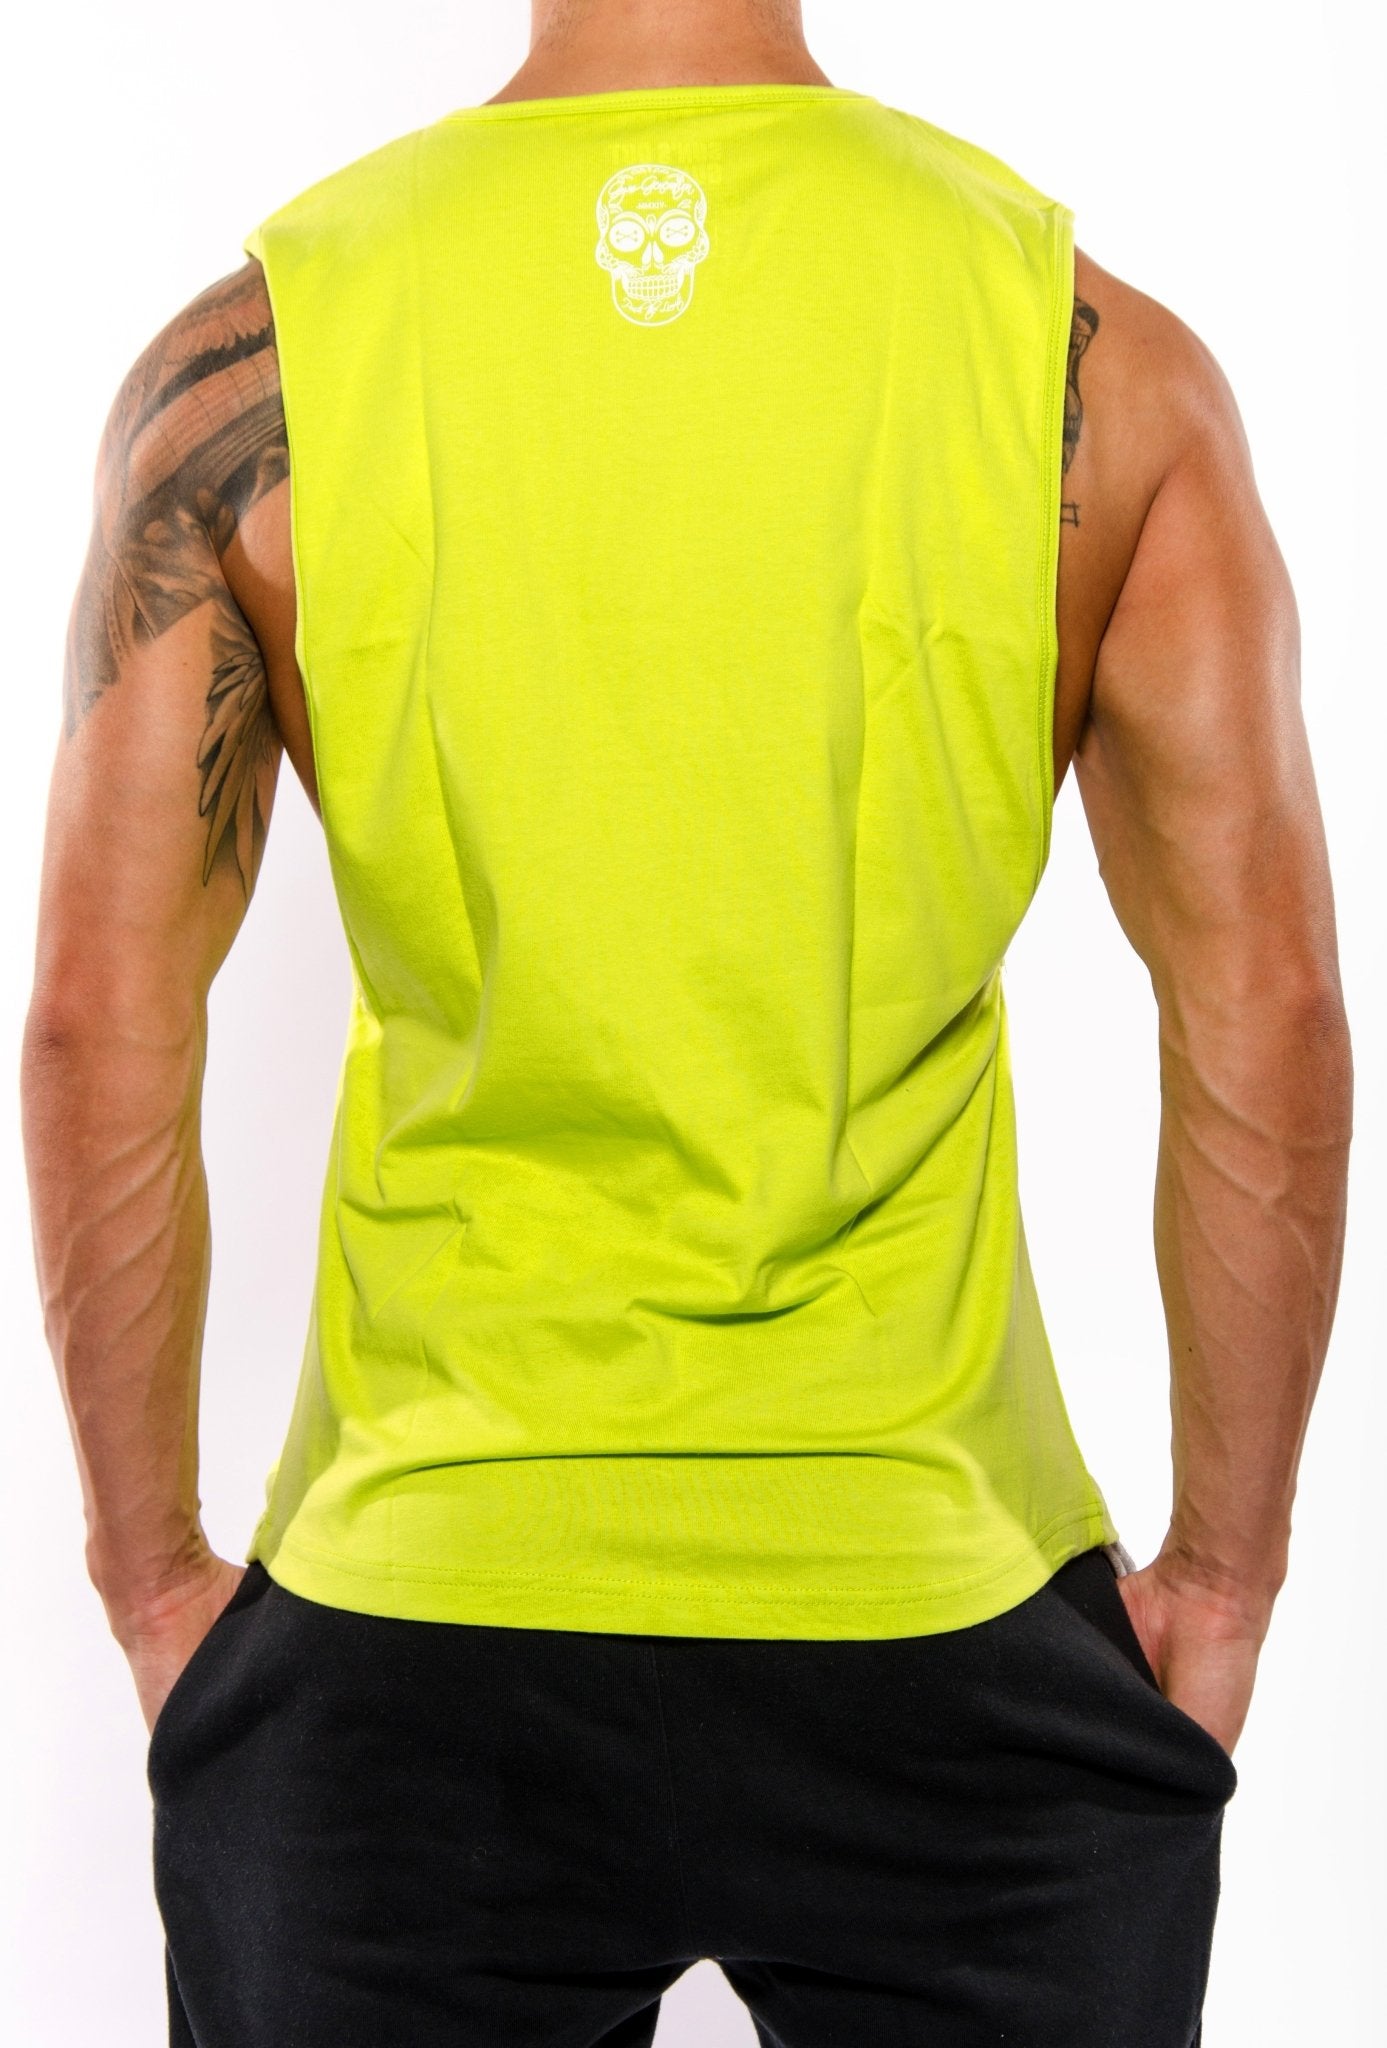 La Catrina Muscle Tank Top - Lime - Gym Generation®--www.gymgeneration.ch